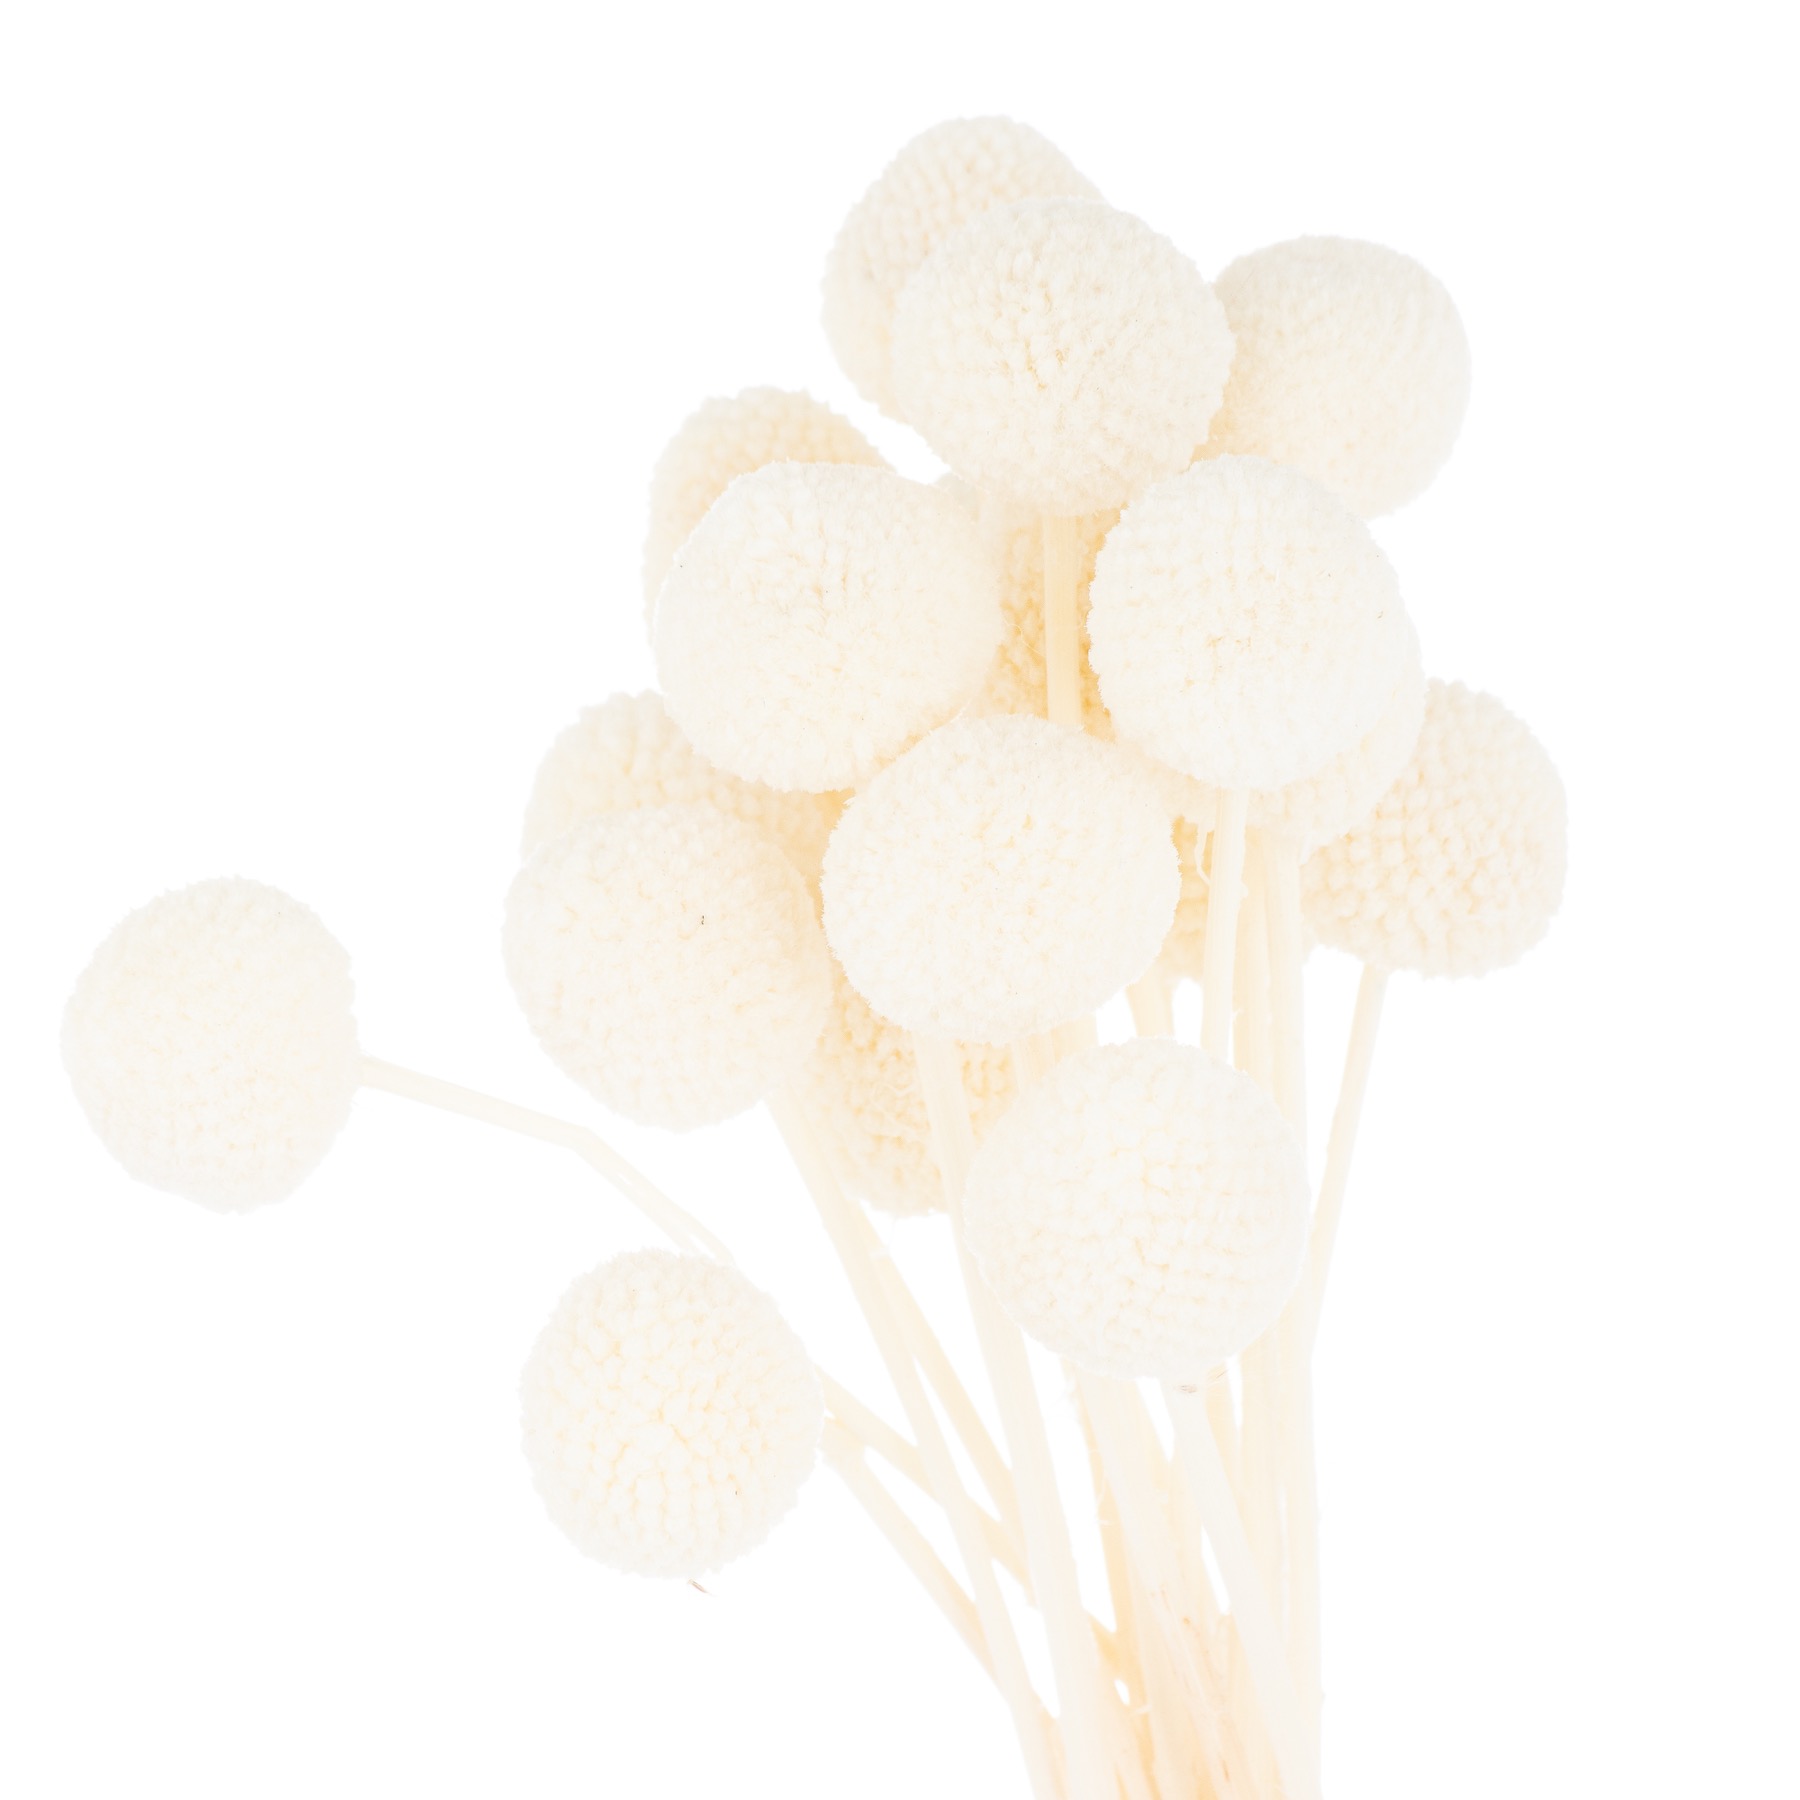 Dried White Billy Ball Bunch Of 20 - Image 1